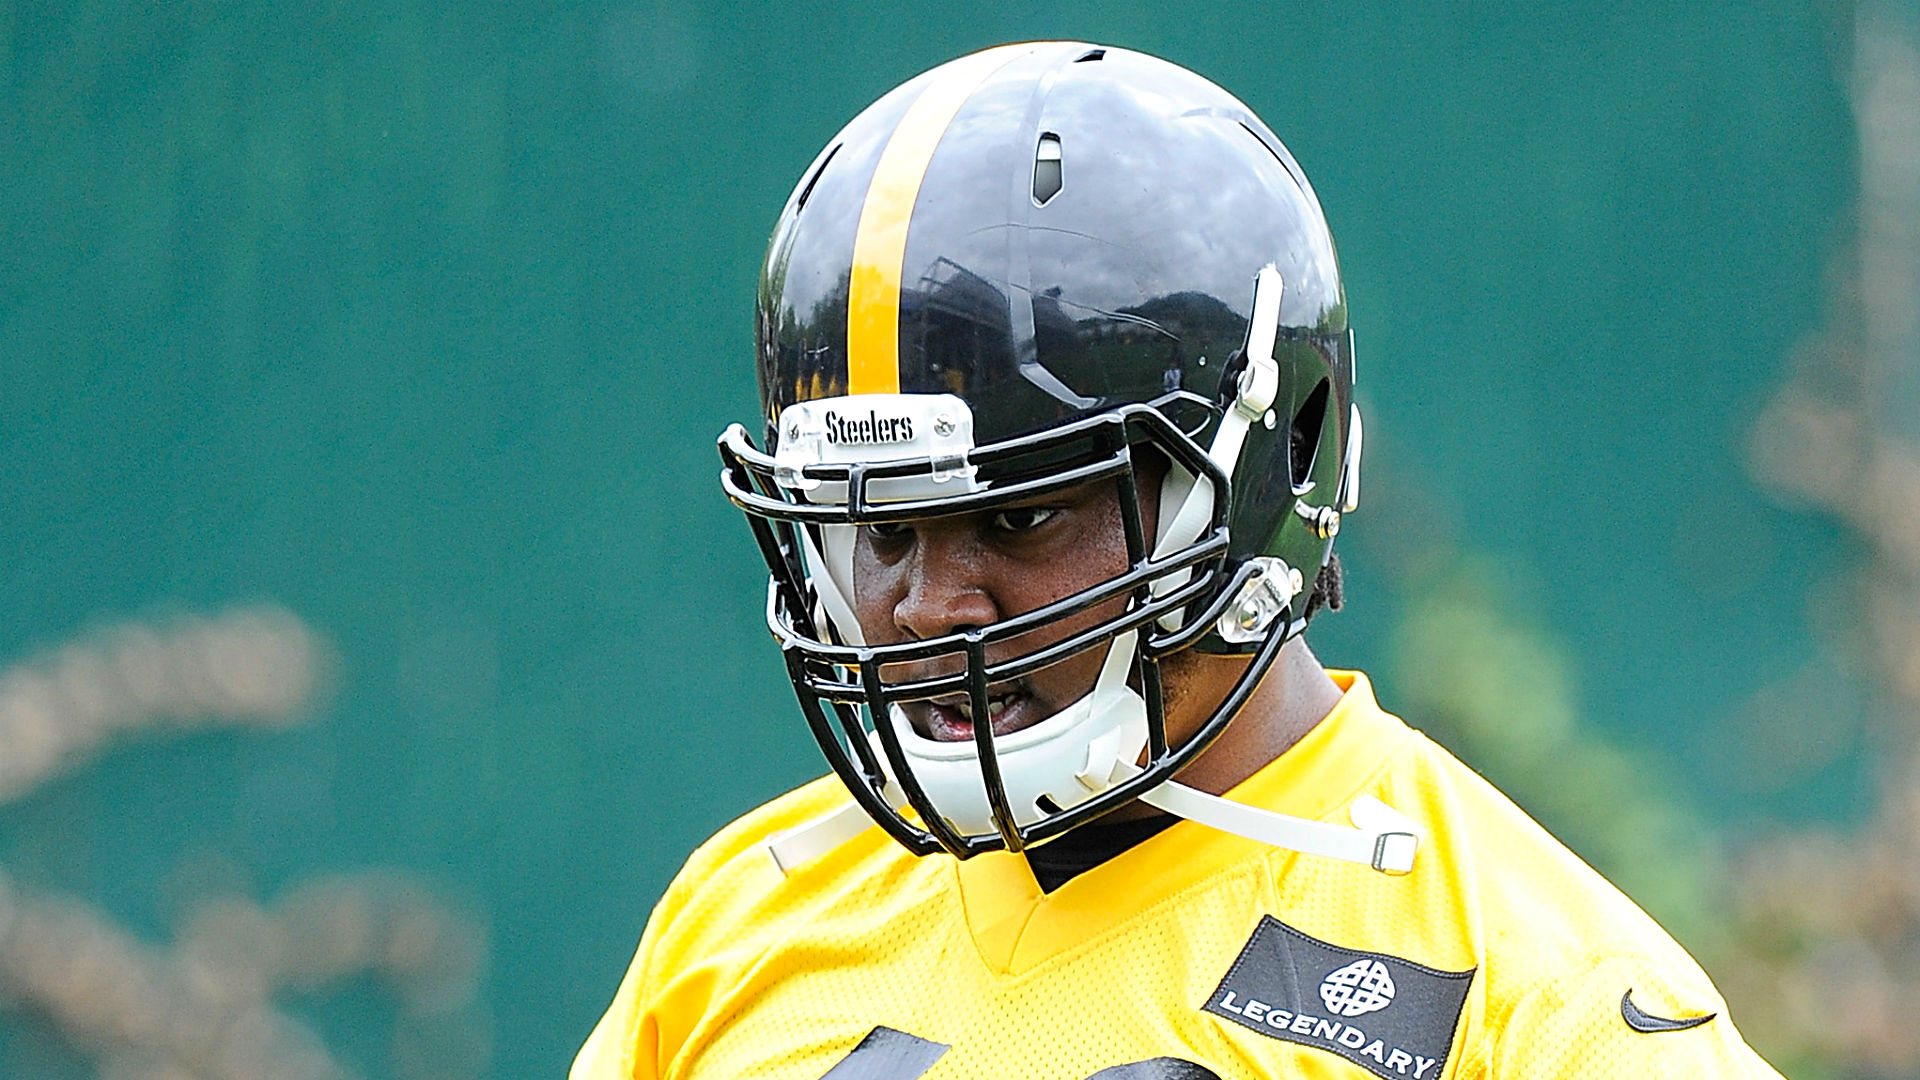 Steelers DE Stephon Tuitt goes from huge contract to possibly missing season with injury